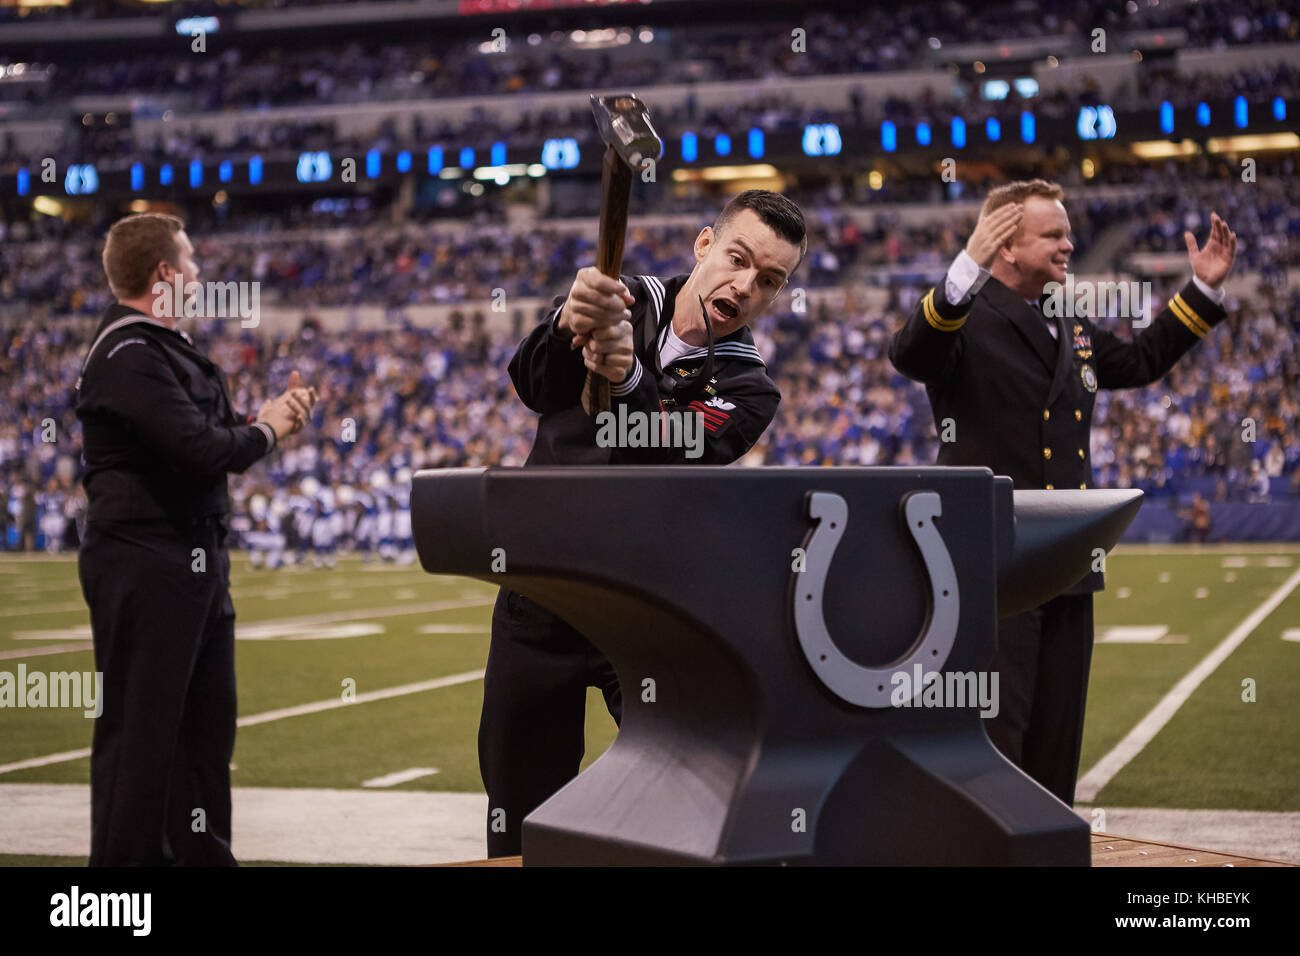 Indianapolis, Indiana, USA. 12th Nov, 2017. November 12th, 2017 - Indianapolis, Indiana, U.S. - A member of the U.S. Navy hits a large Indianapolis Colts anvil with a sledge hammer before an NFL Football game between the Pittsburgh Steelers and the Indianapolis Colts at Lucas Oil Stadium. Credit: Adam Lacy/ZUMA Wire/Alamy Live News Stock Photo